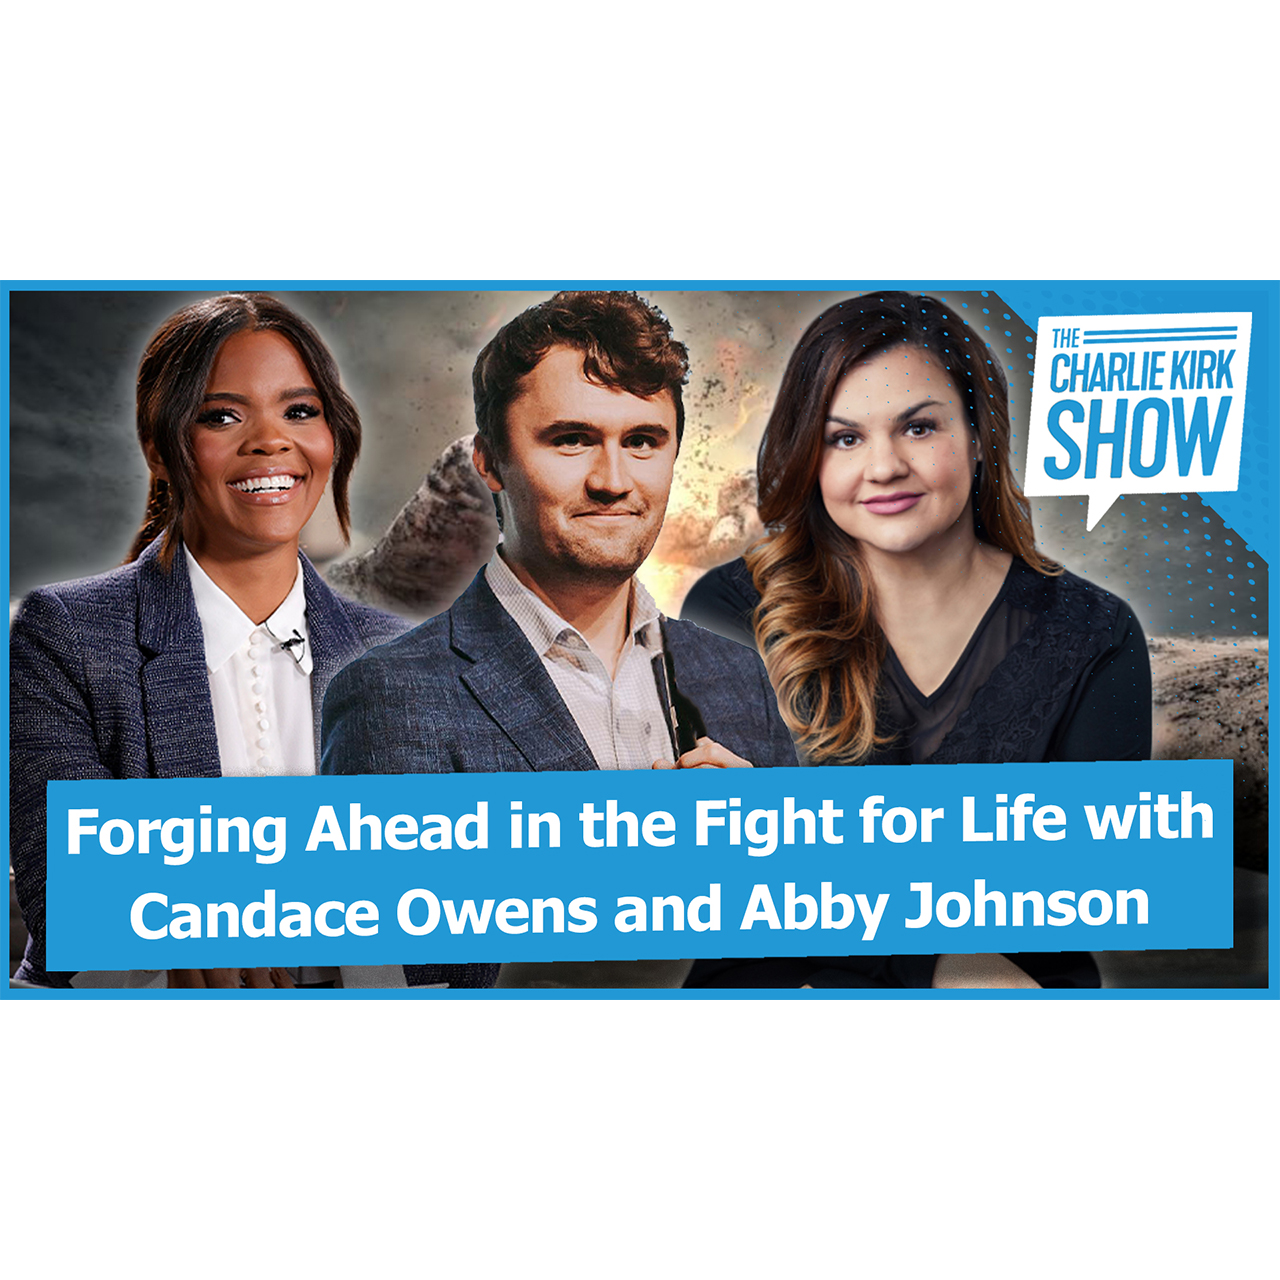 Forging Ahead in the Fight for Life with Candace Owens and Abby Johnson